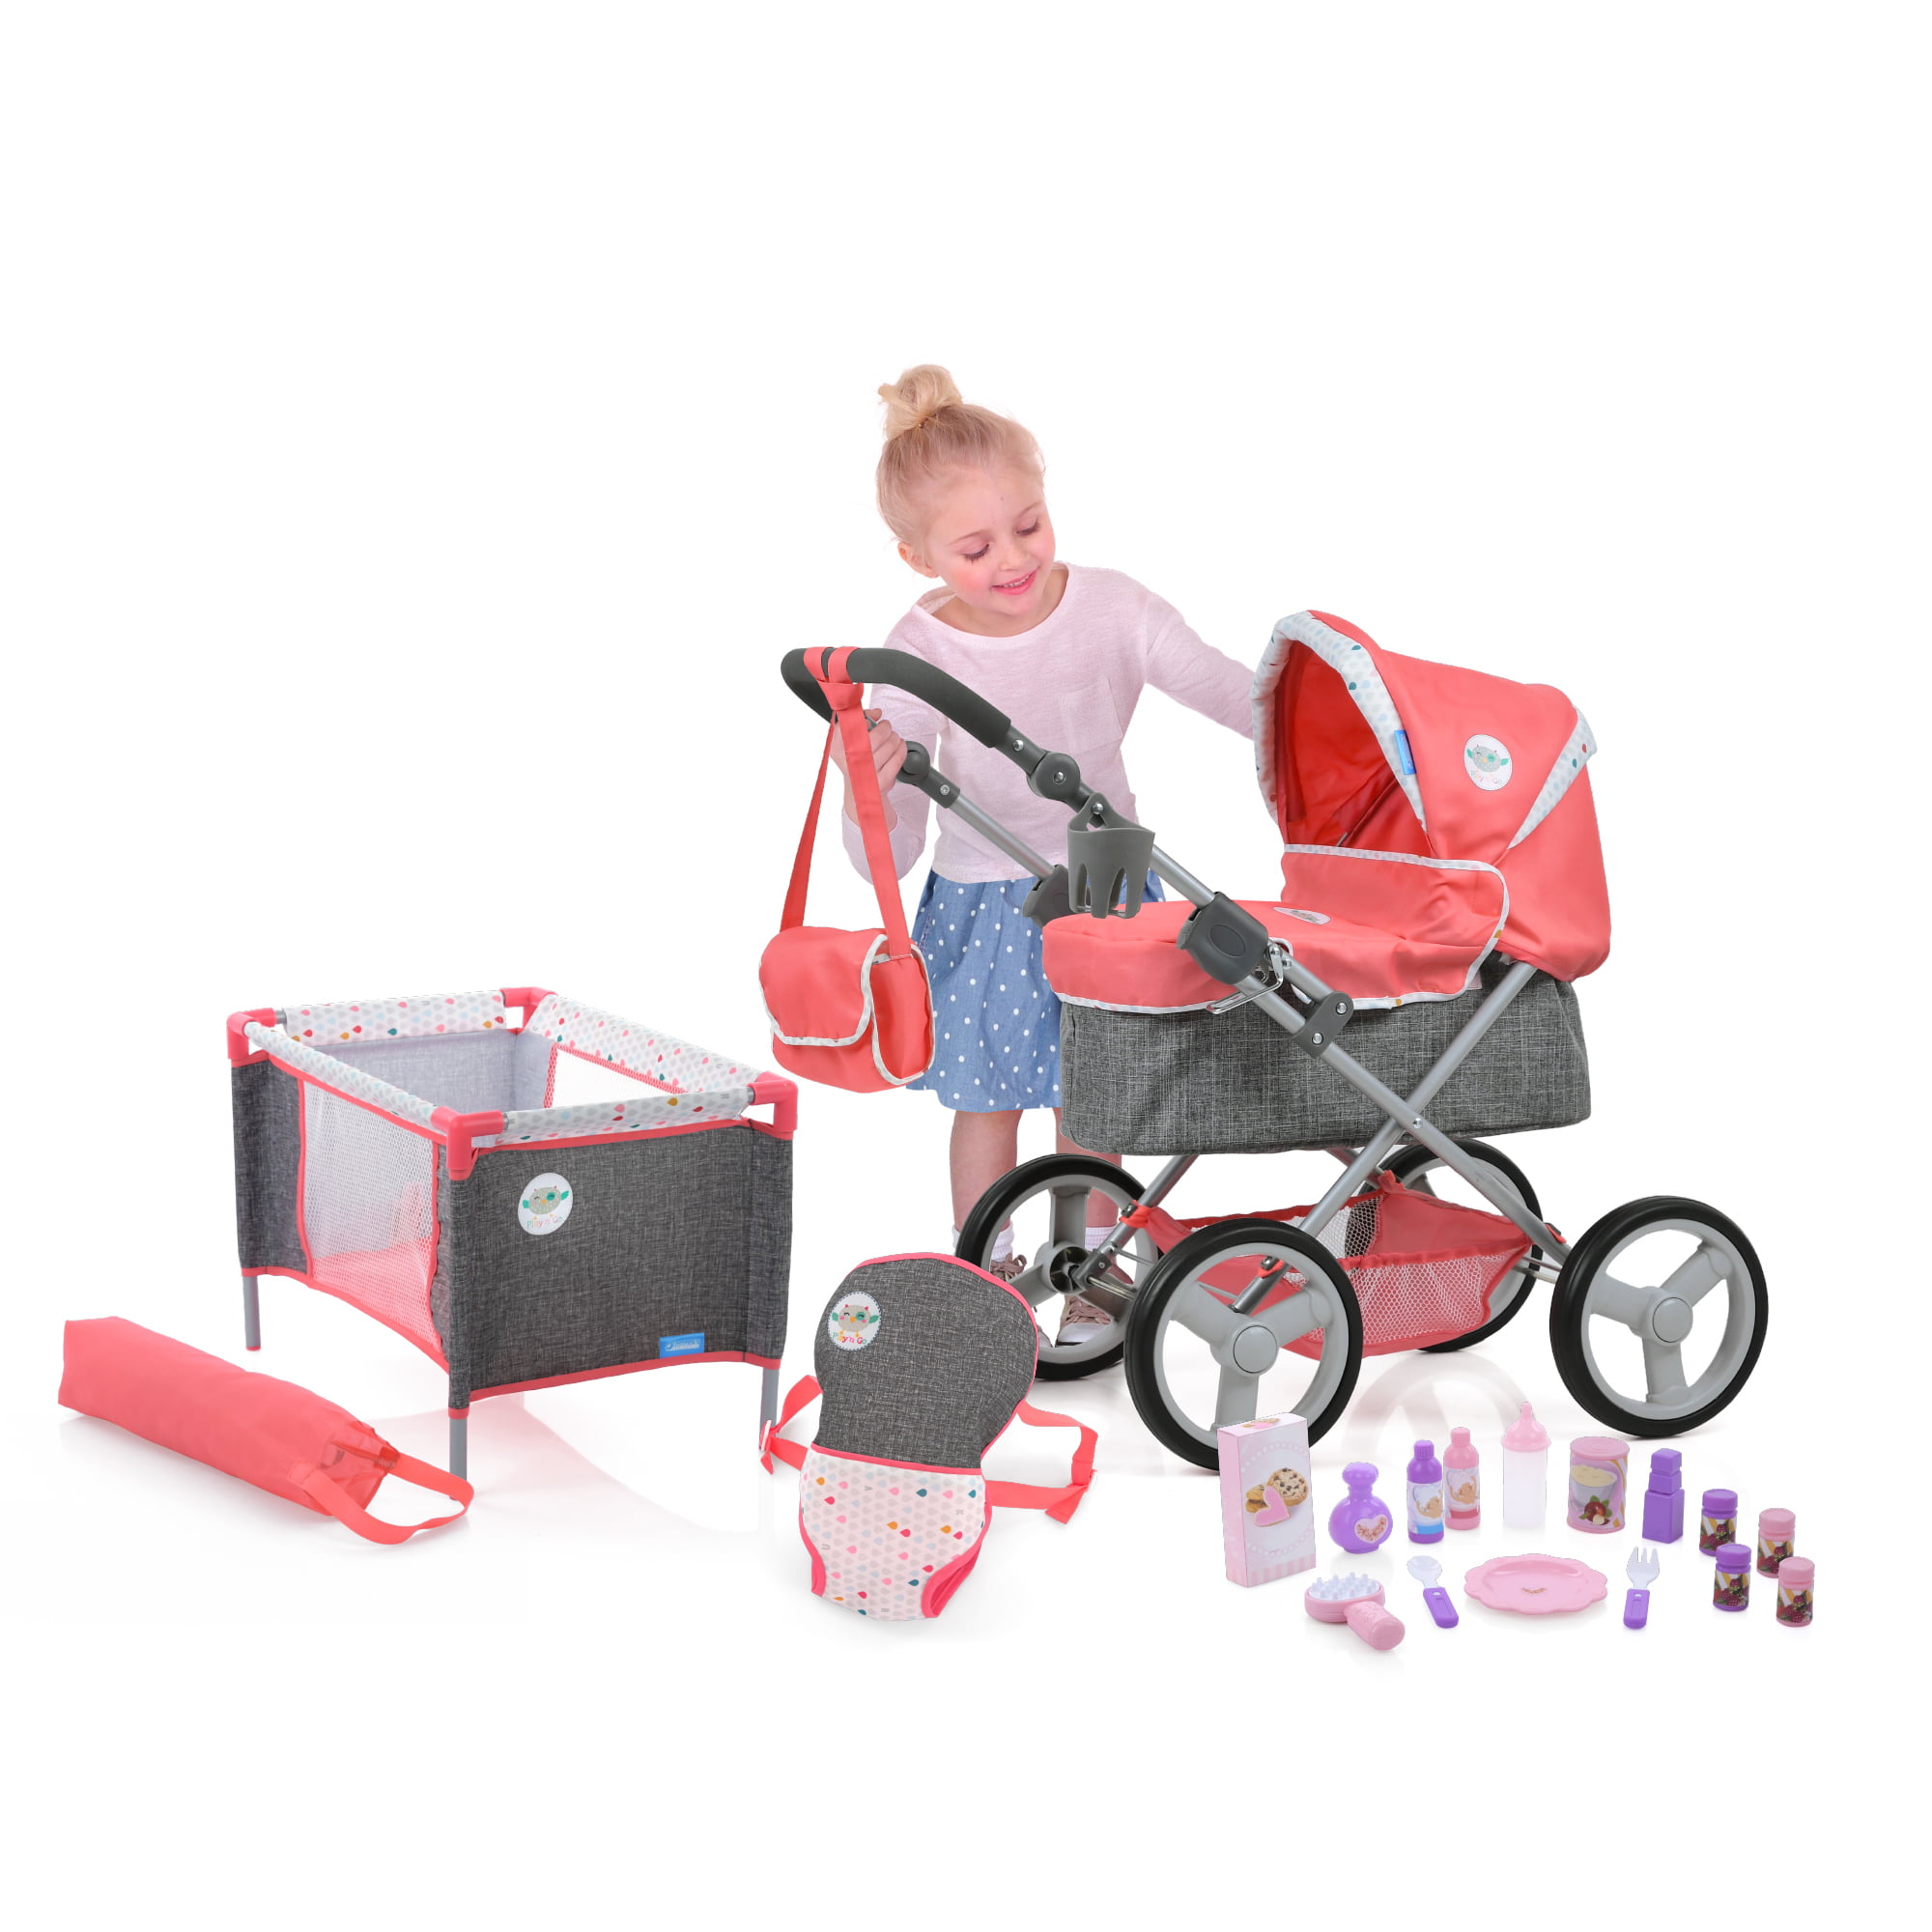 Hauck Play N Go Toy Doll Pram Set - Diaper Bag, Play Yard, Front Carrier and  15 Piece